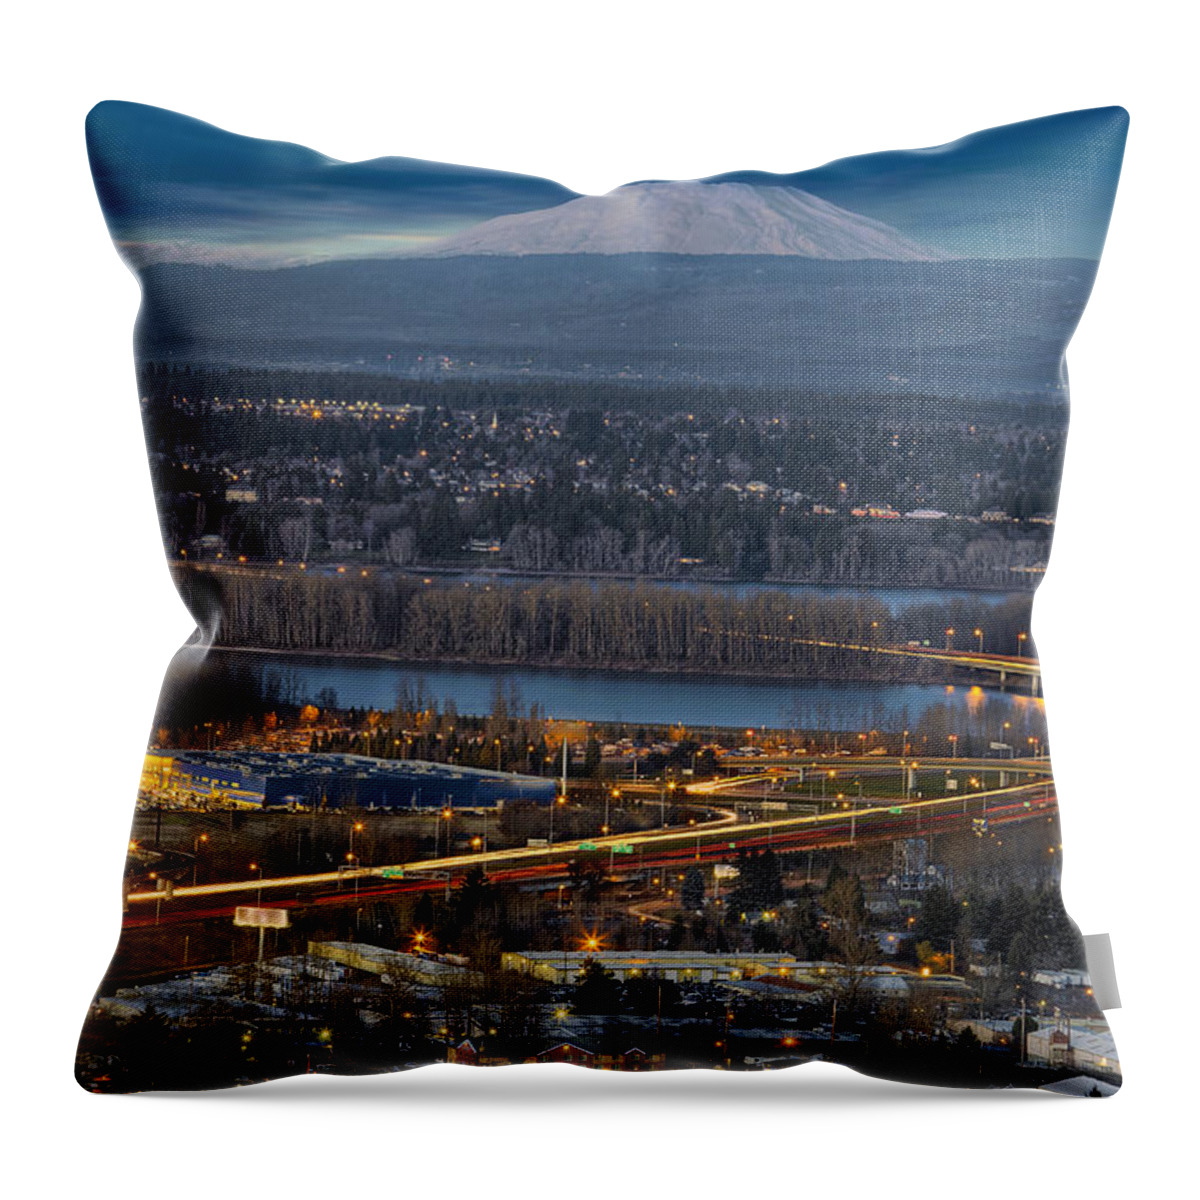 Saint Throw Pillow featuring the photograph Mt Saint Helens during Blue Hour by David Gn